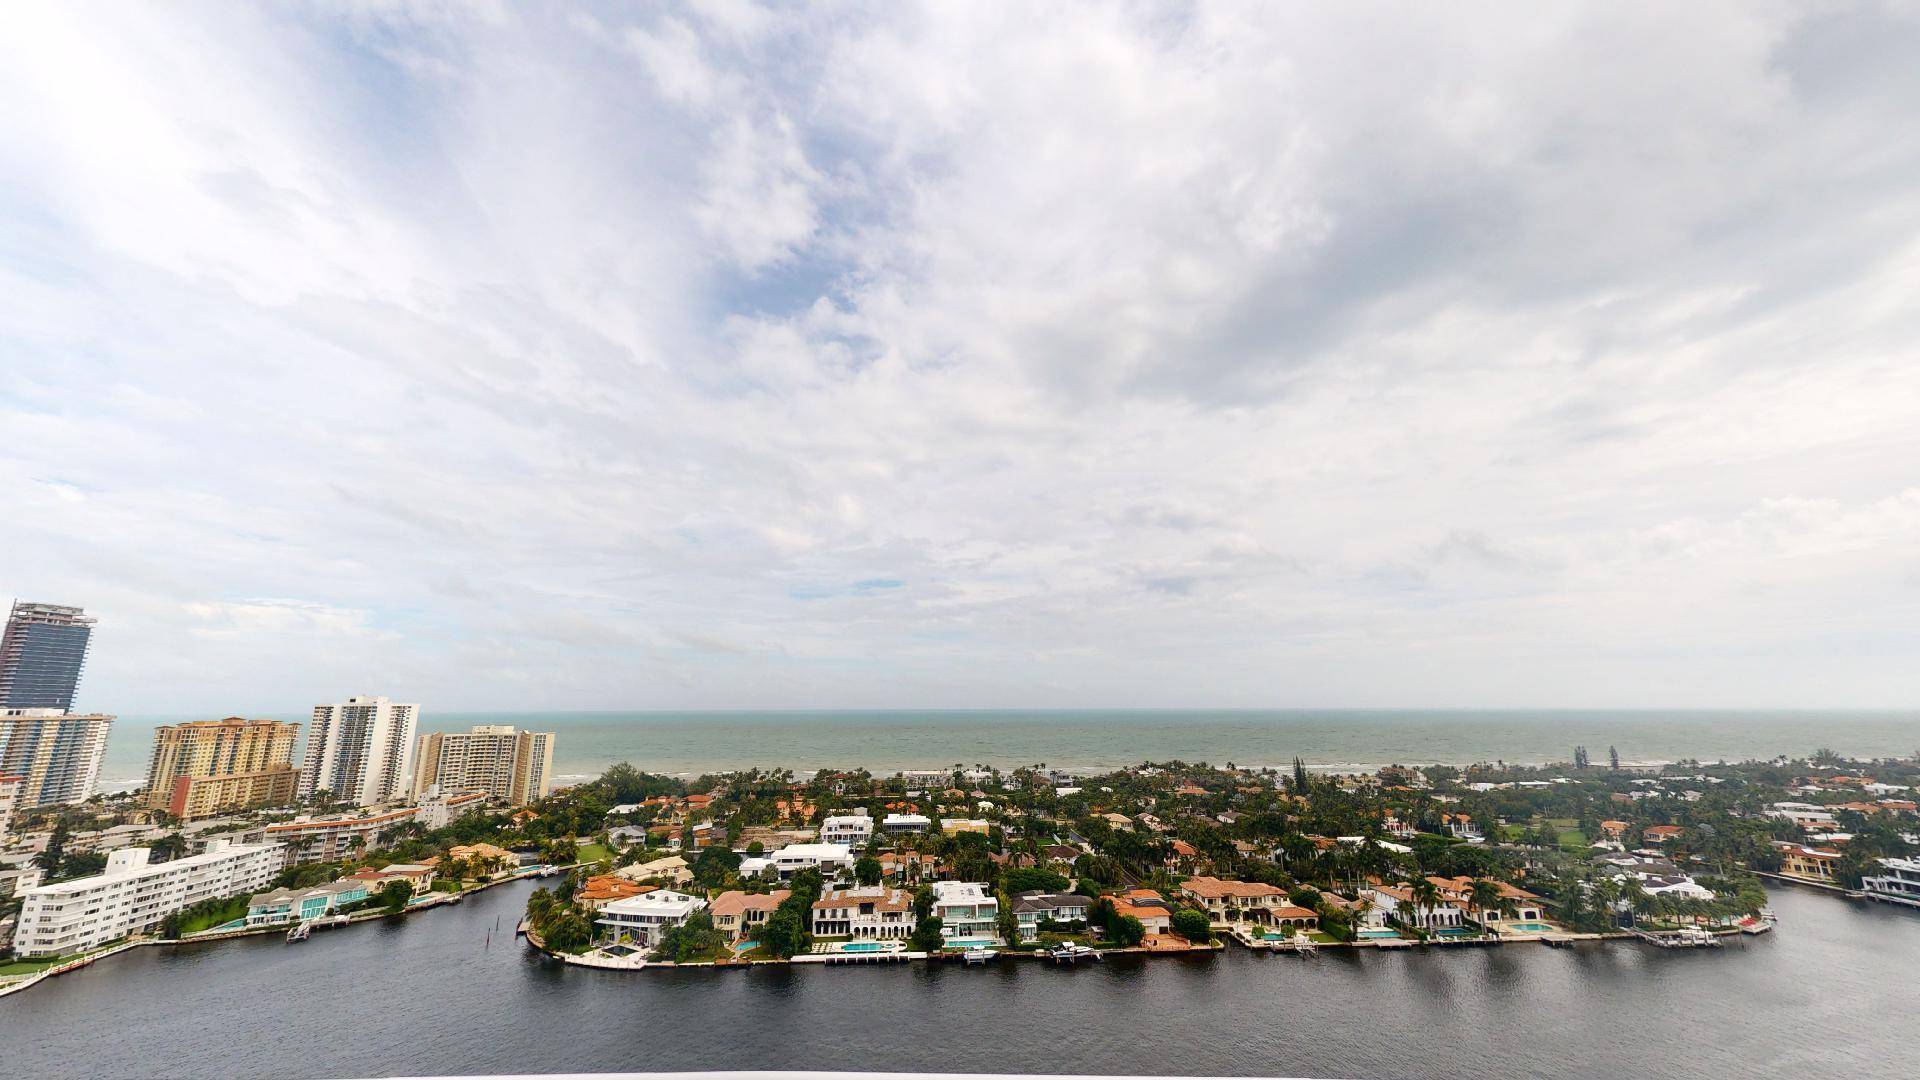 Enjoy condo living at its finest with spectacular panoramic ocean, intracoastal, and city views as an abundance of natural light flows through the plentiful glassed areas.